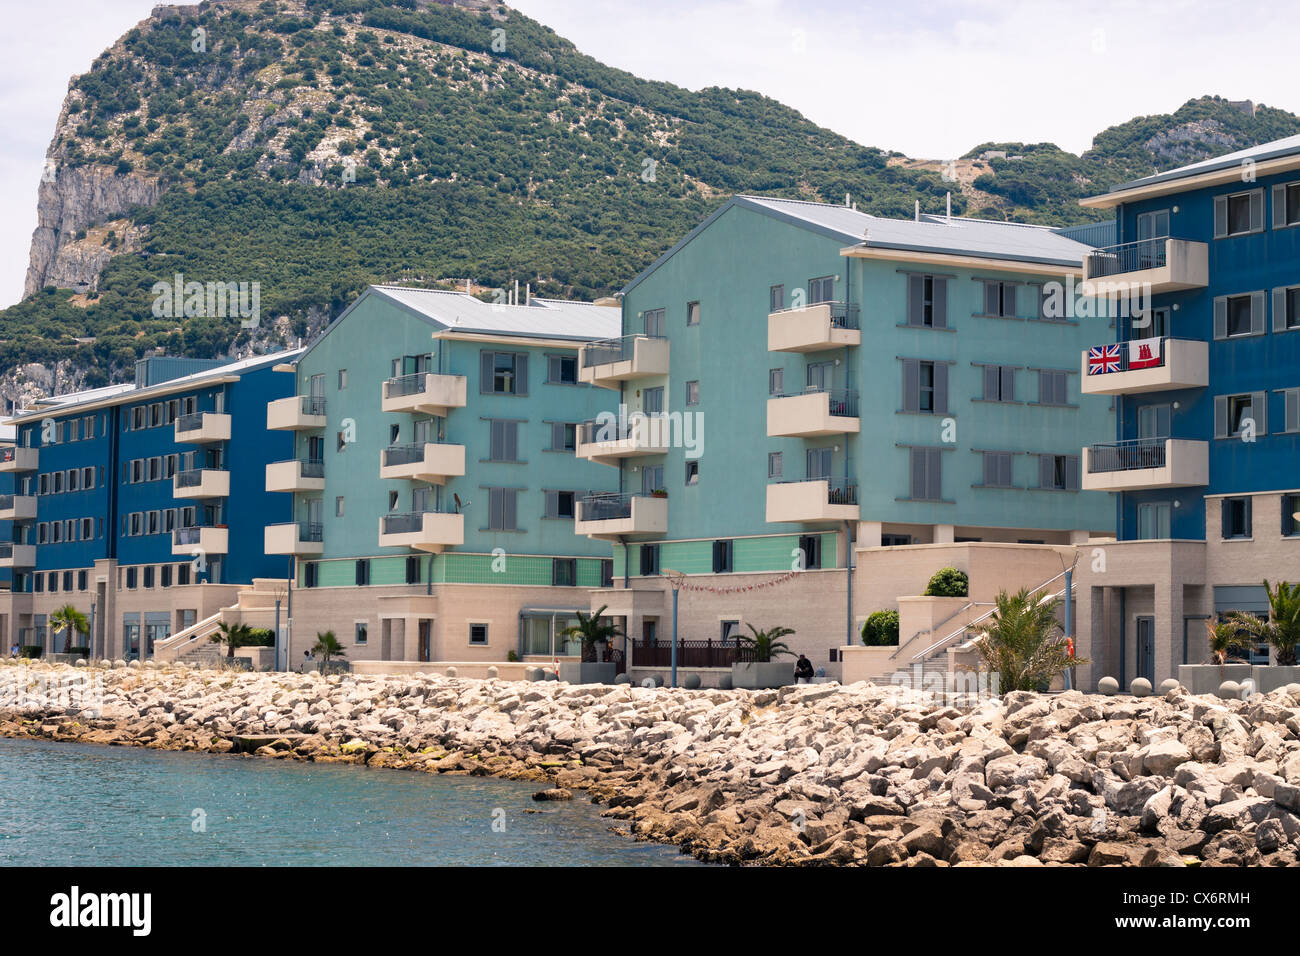 Exterior of buildings on the coast, Gibraltar, UK. Stock Photo